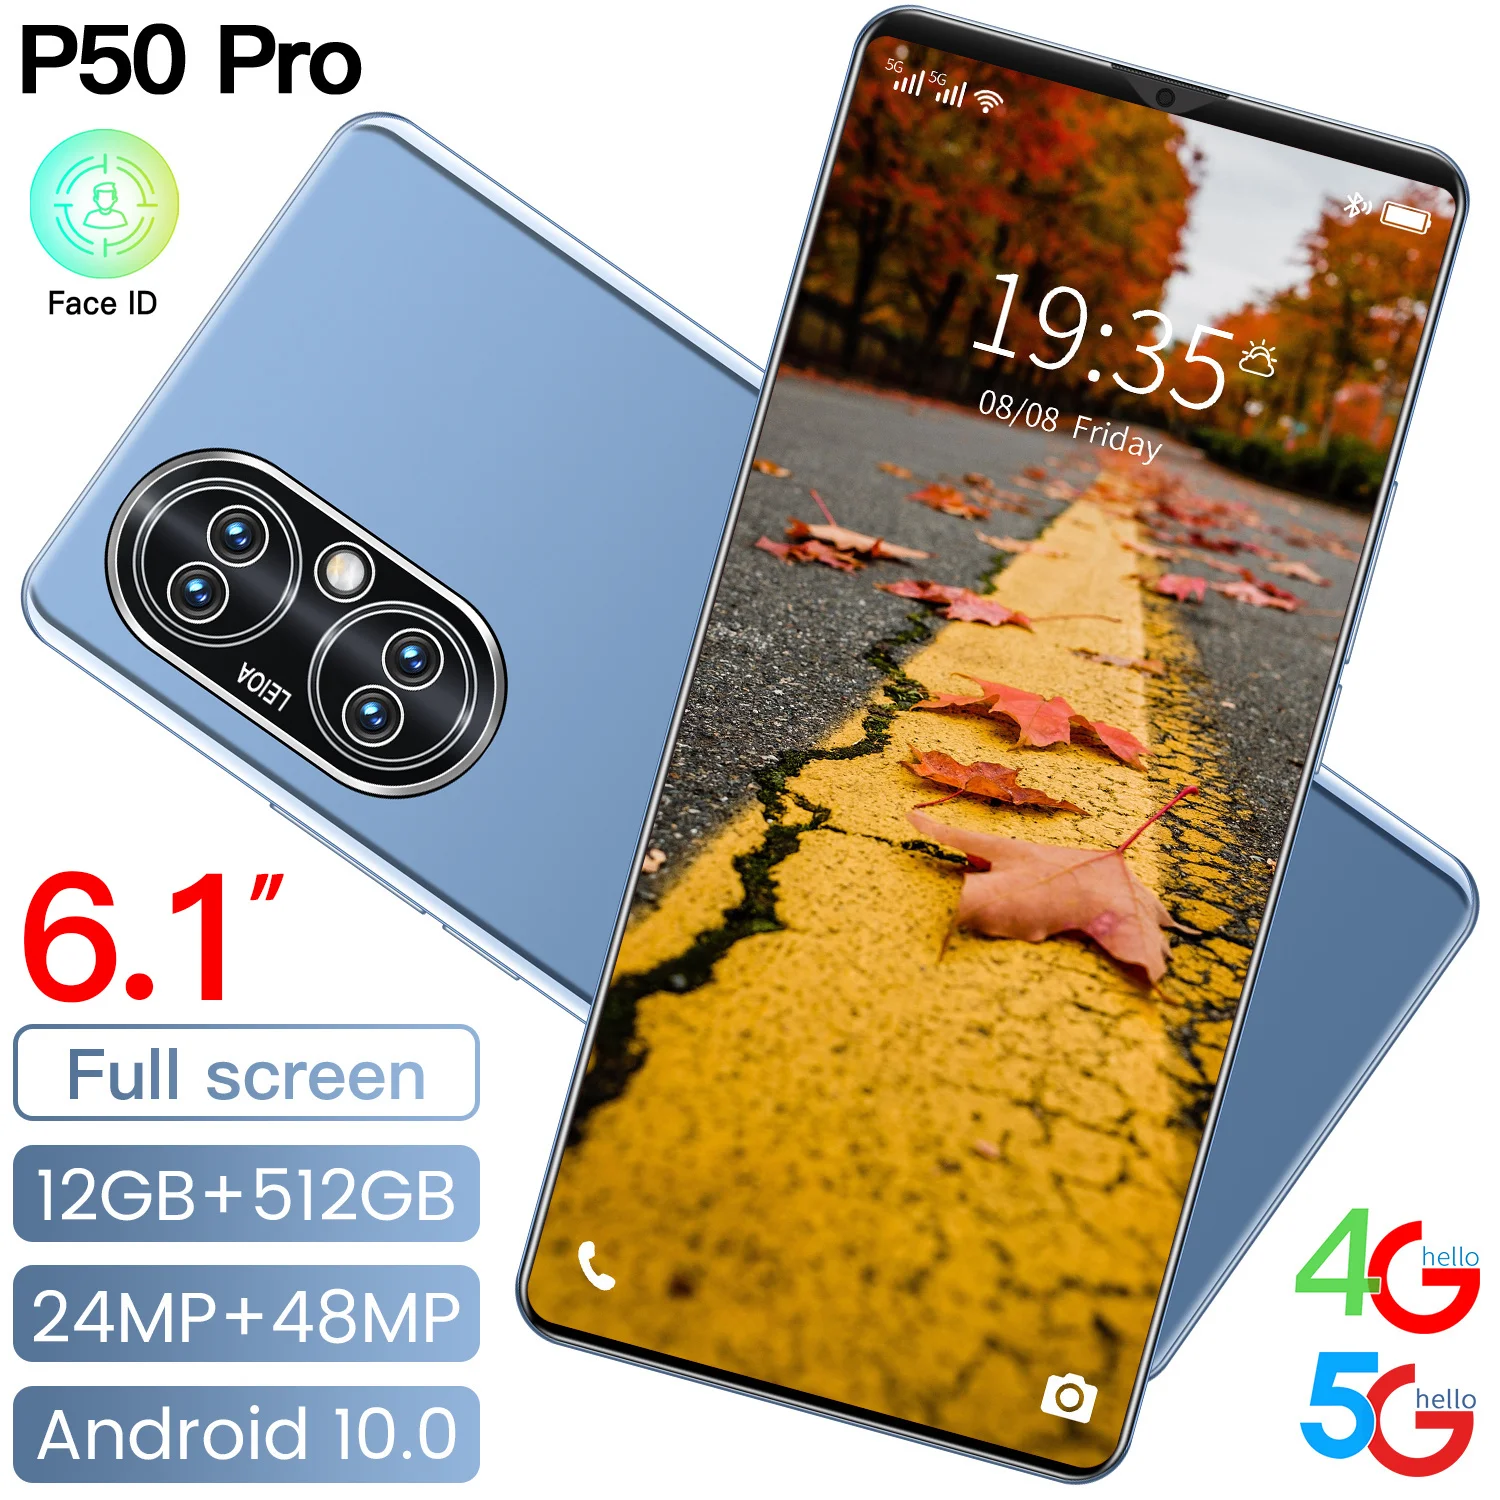 

P50 PRO 6.1inch Big Screen Cellphone 12+512GB Dual SIM Card Dual Standby Smartphone Face Recognition Mobile Phone, Black/grey/orange